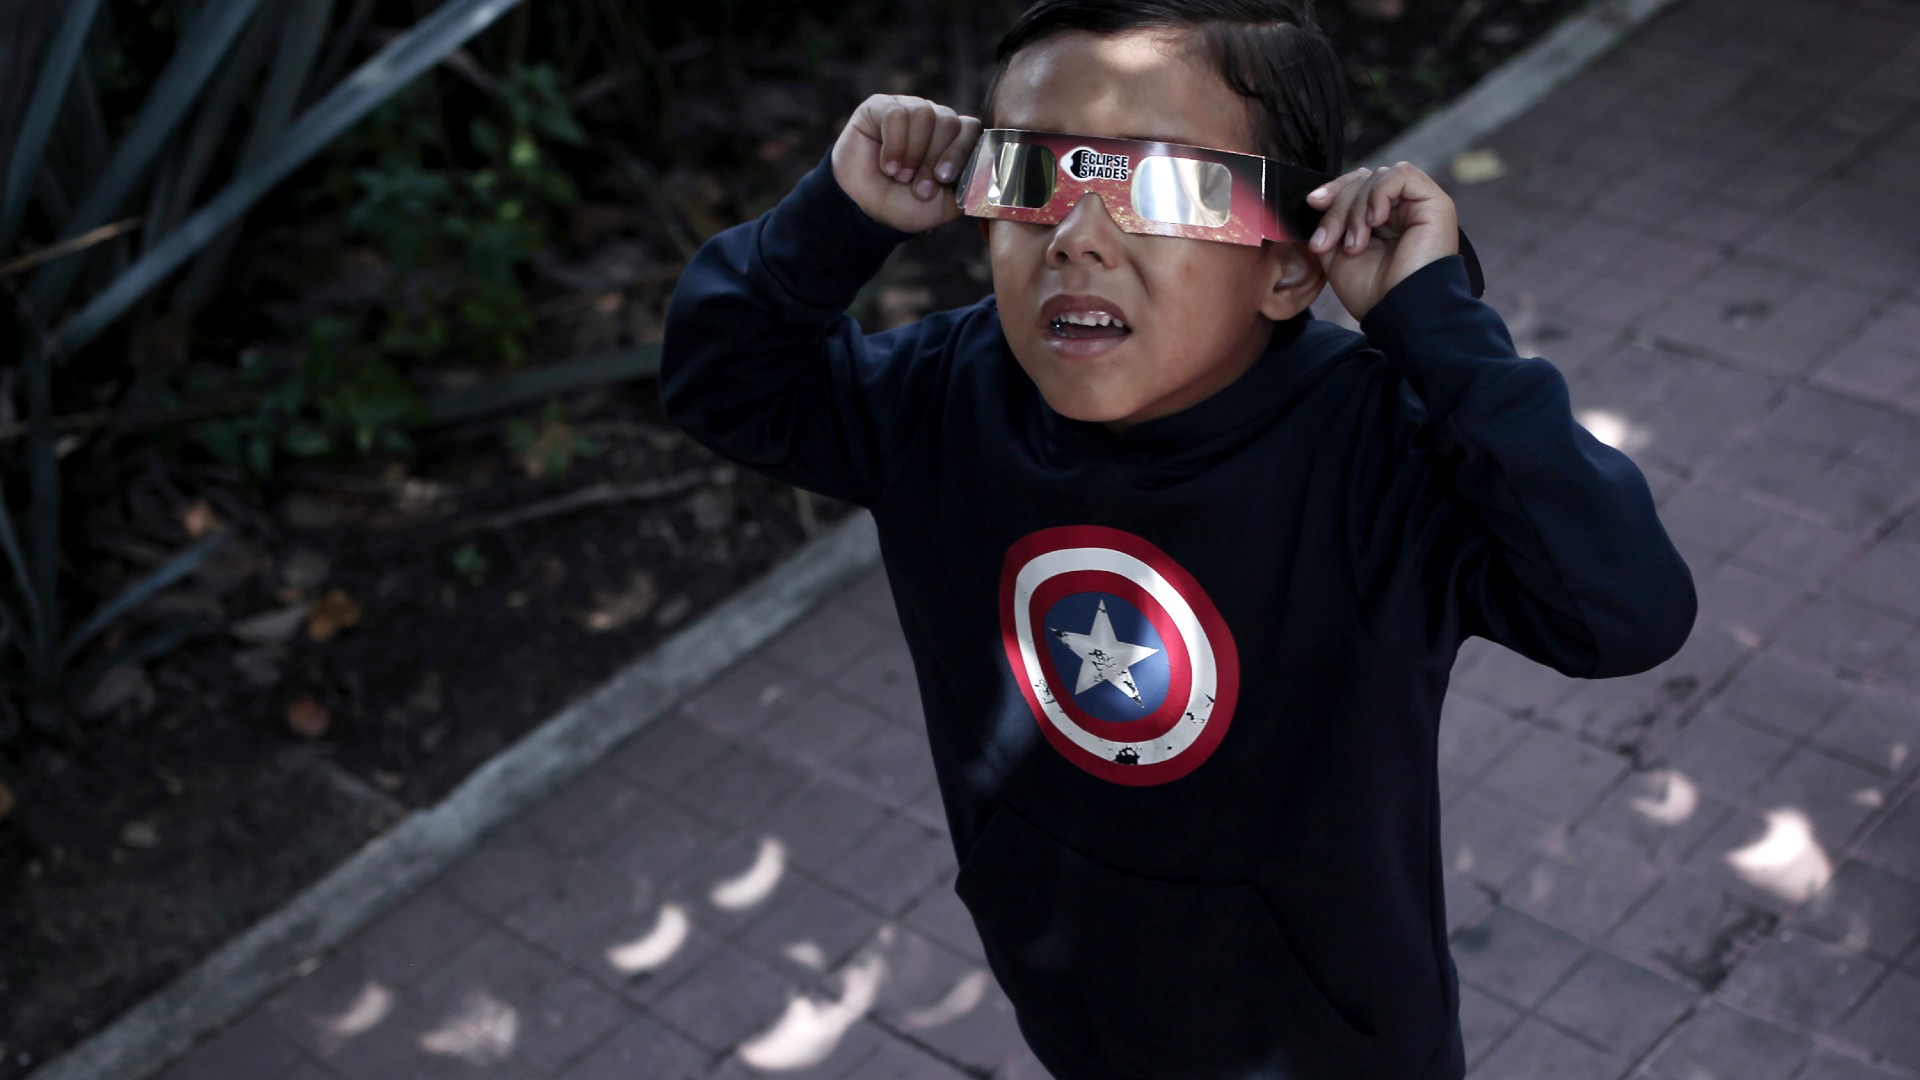 A child wearing eclipse glasses looks upward, with crescent shadows on the pavement below